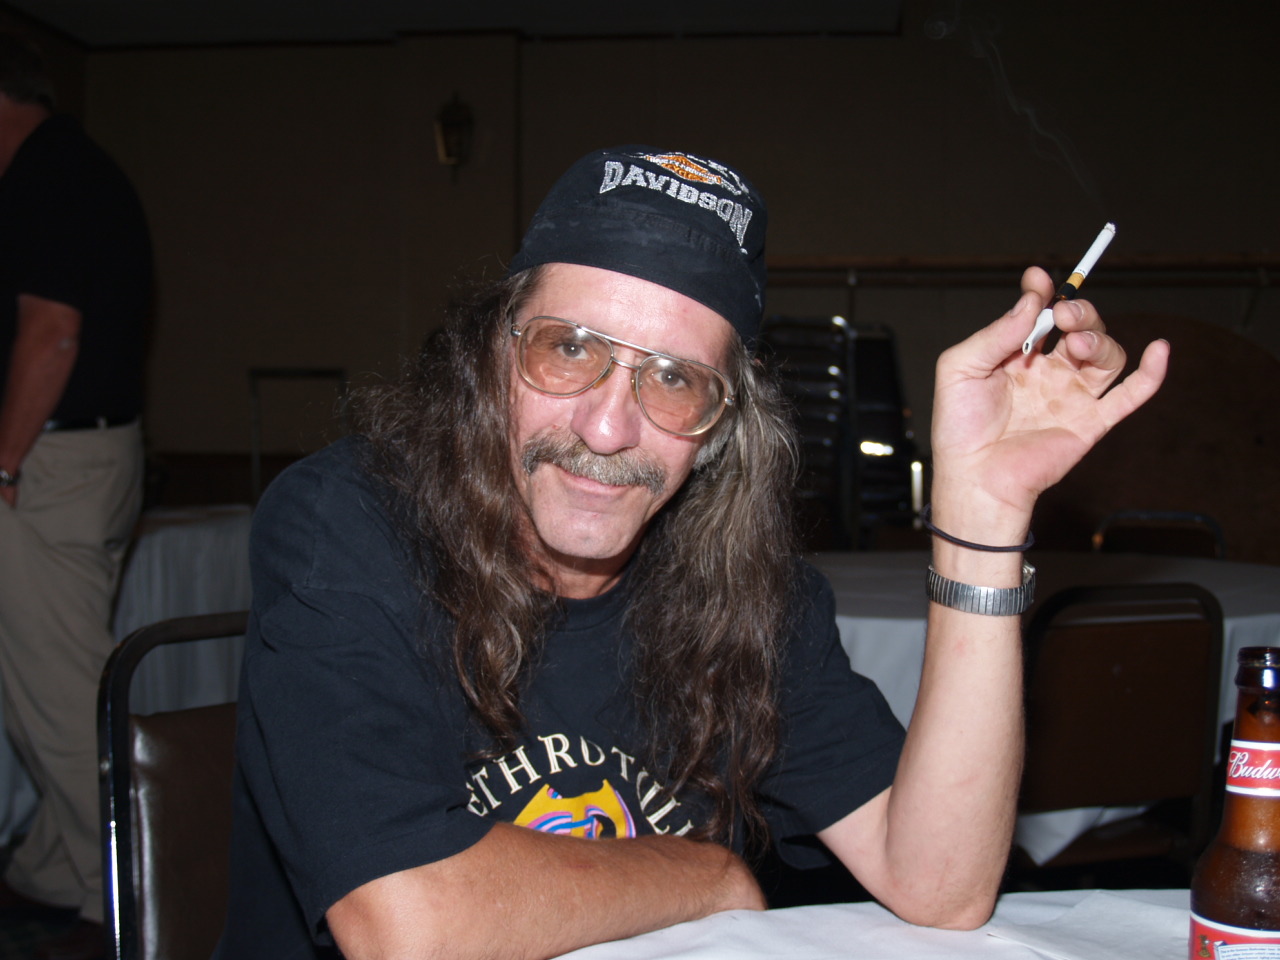 a man with a hat, shirt, and smoking cigarette